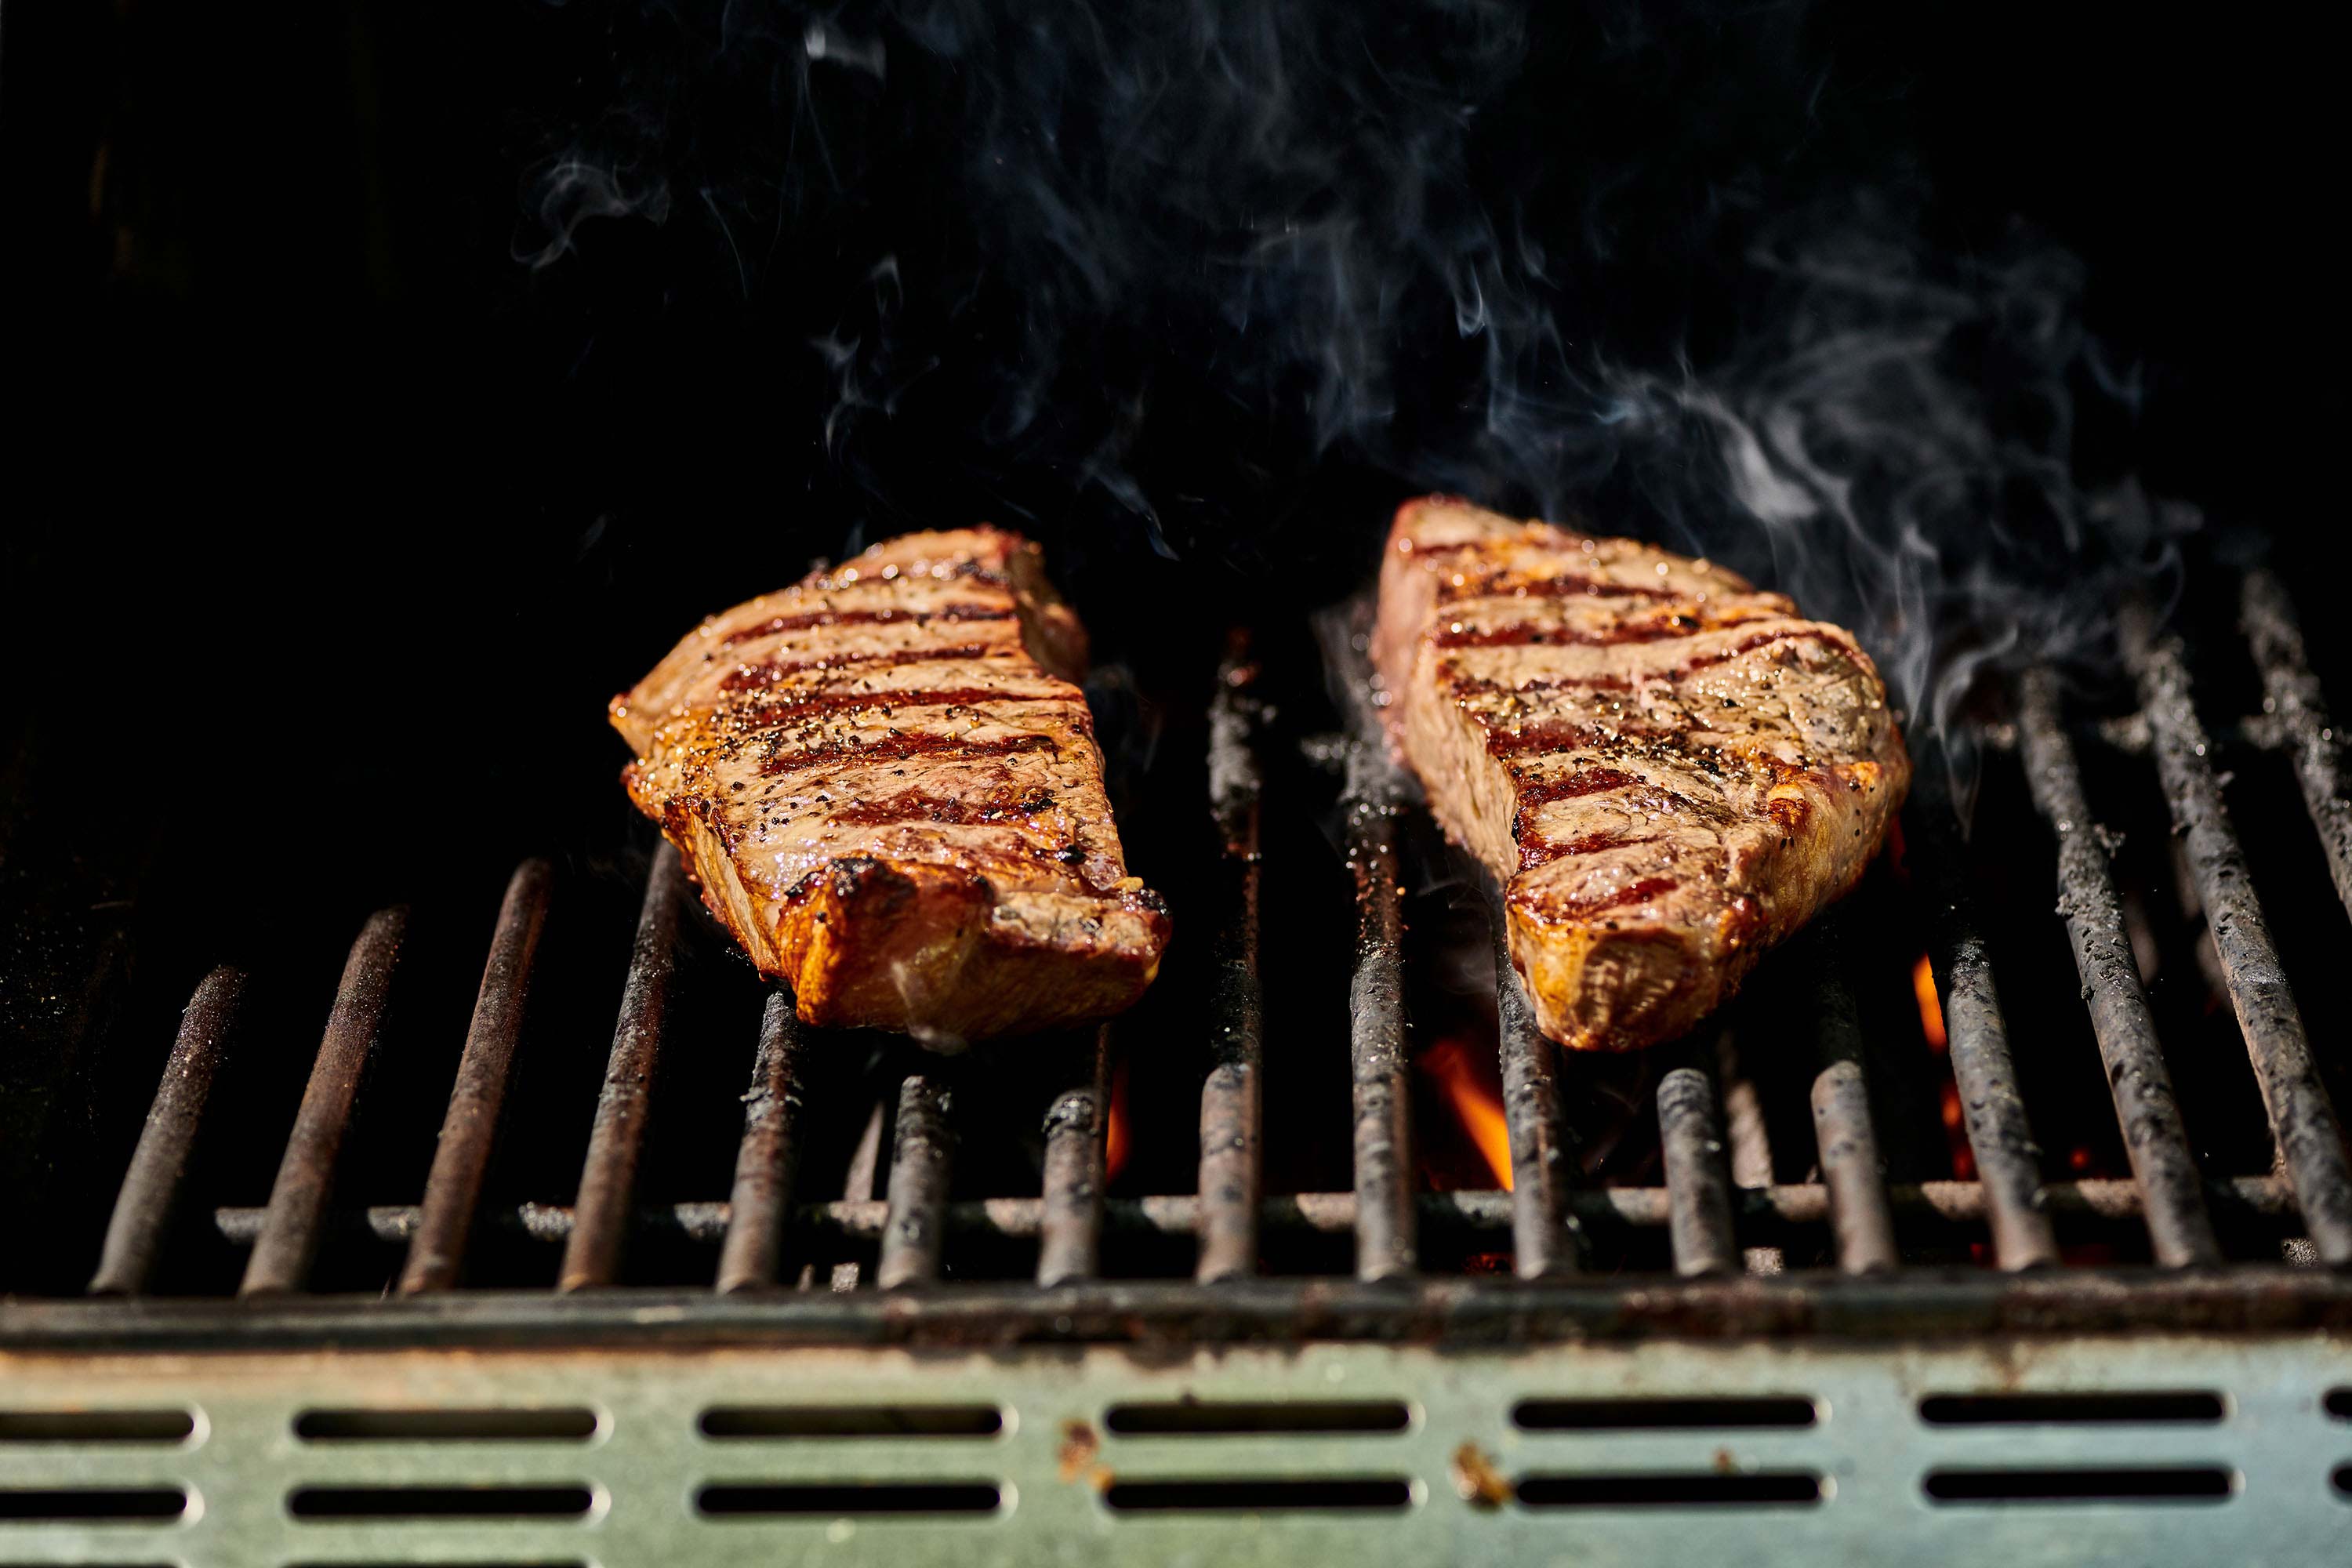 https://themom100.com/wp-content/uploads/2021/06/how-to-grill-new-york-strip-steaks-467.jpg